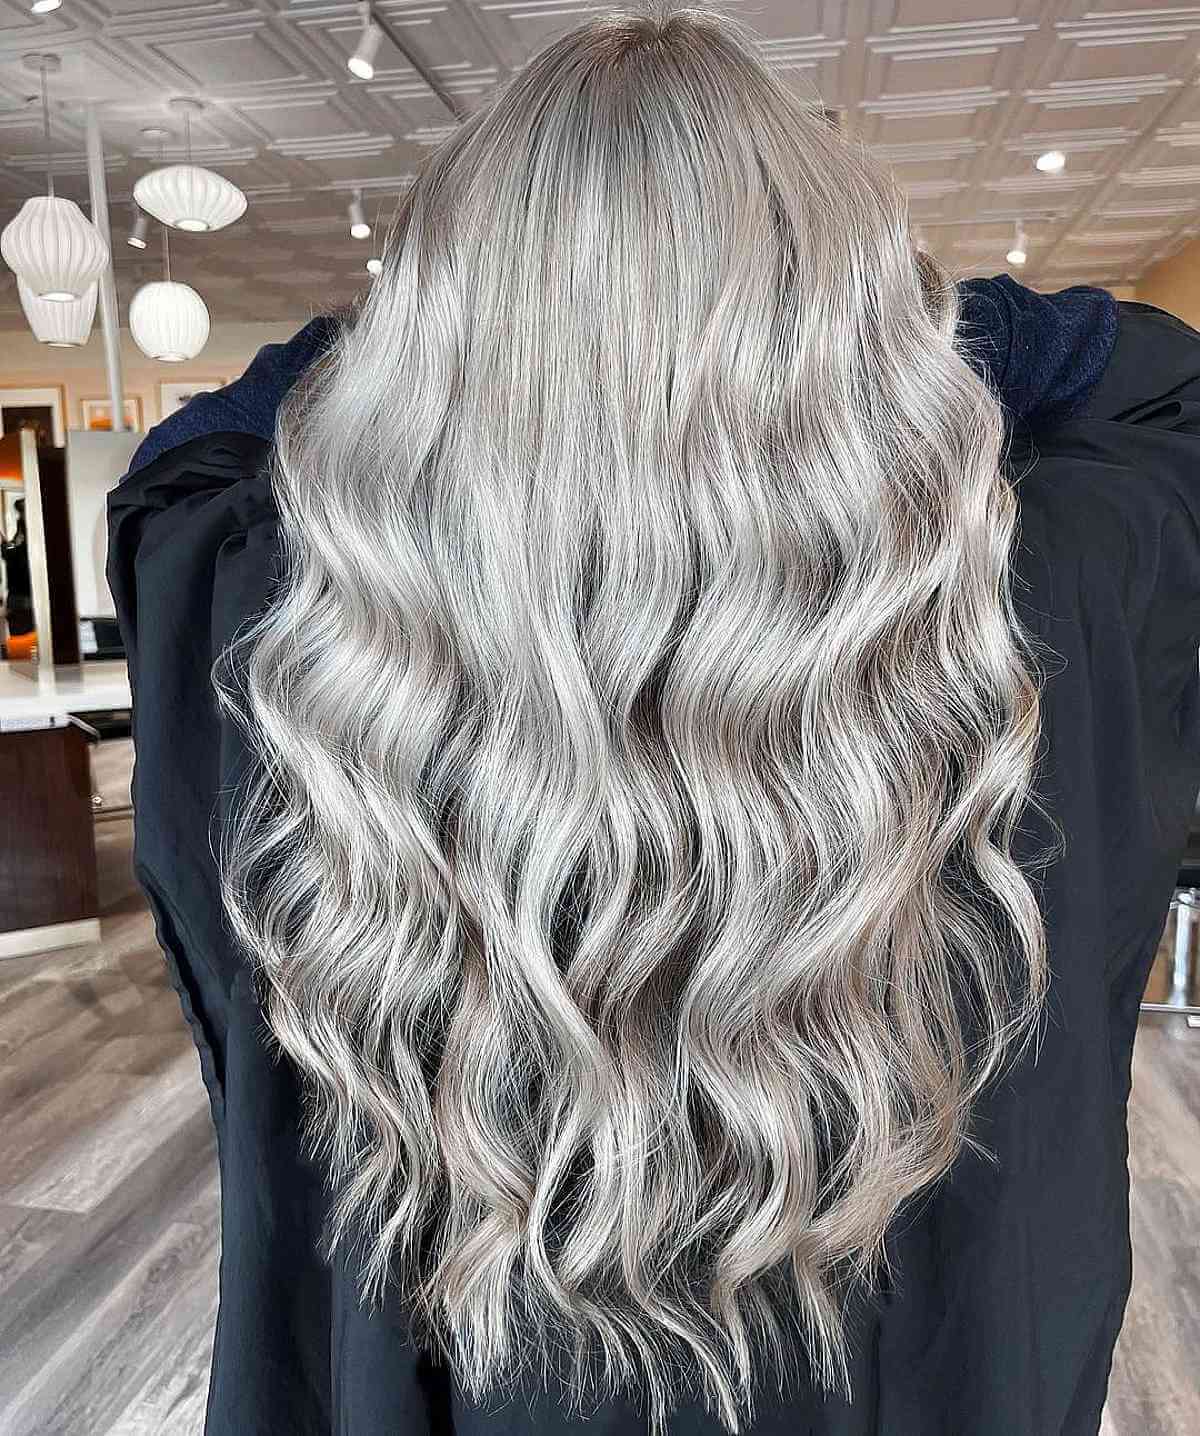 Sexy Silver and Blonde Long Wavy Hair